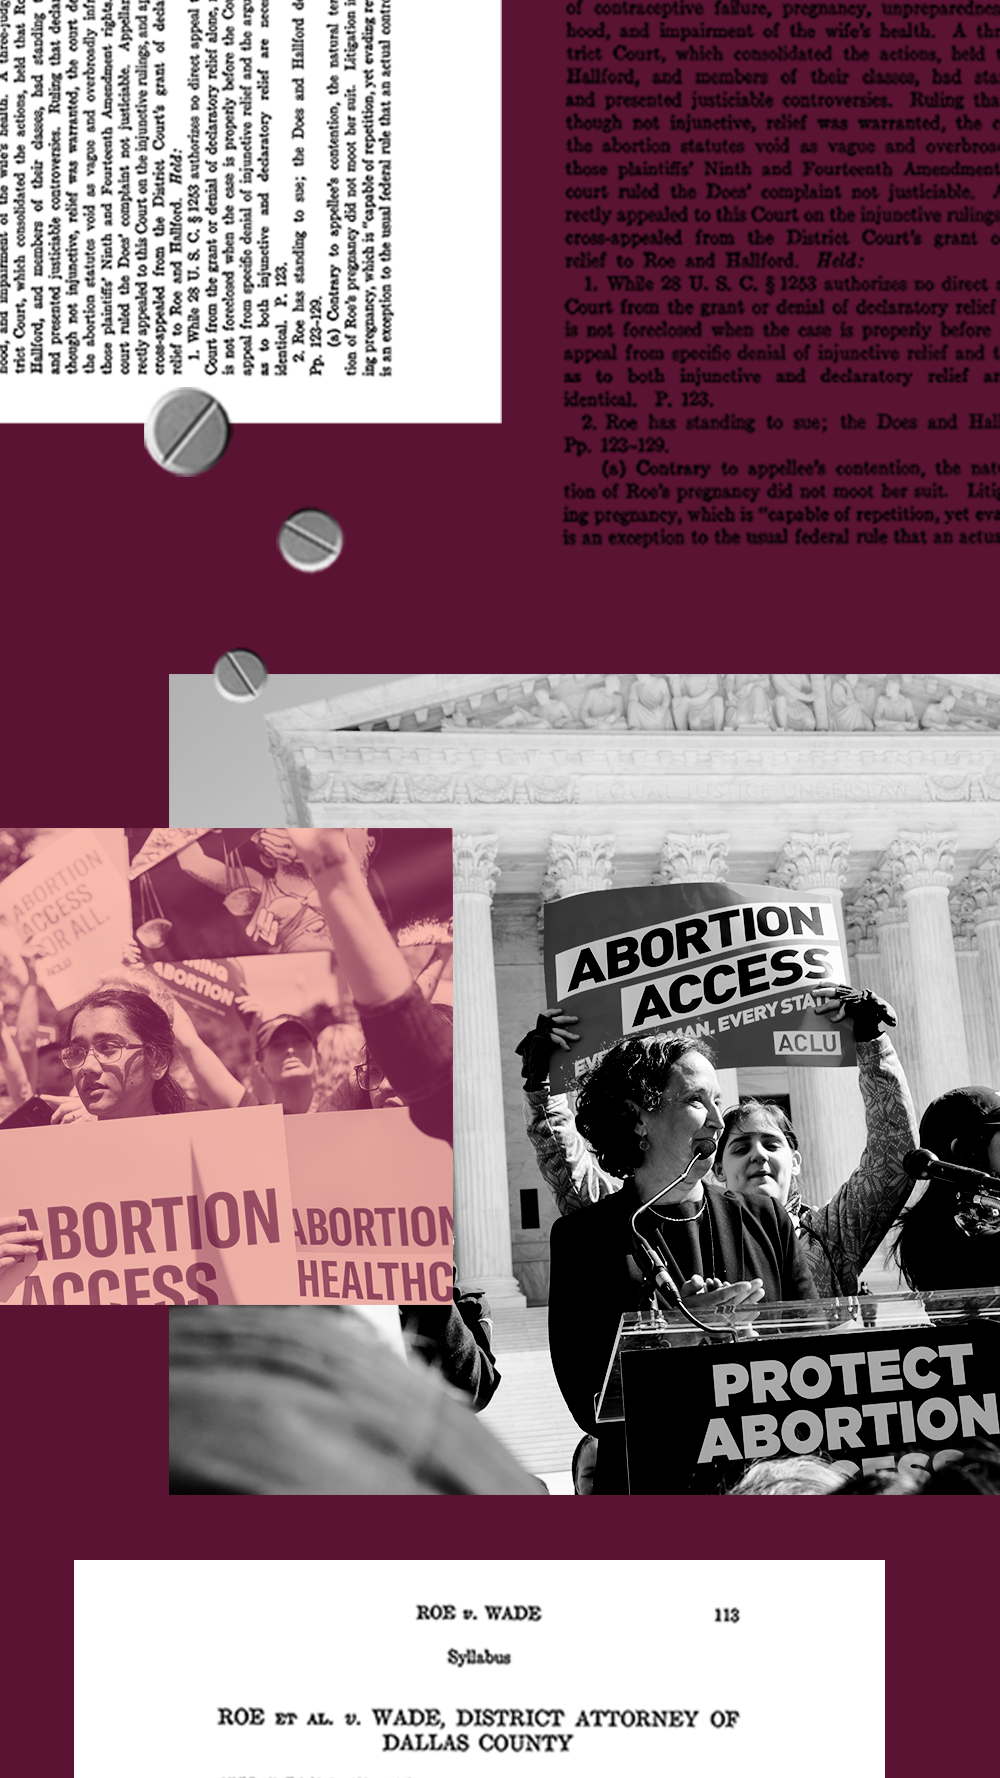 A collage of pro-choice protestors, Roe v. Wade documents, and medical abortion pills all on a burgundy background.